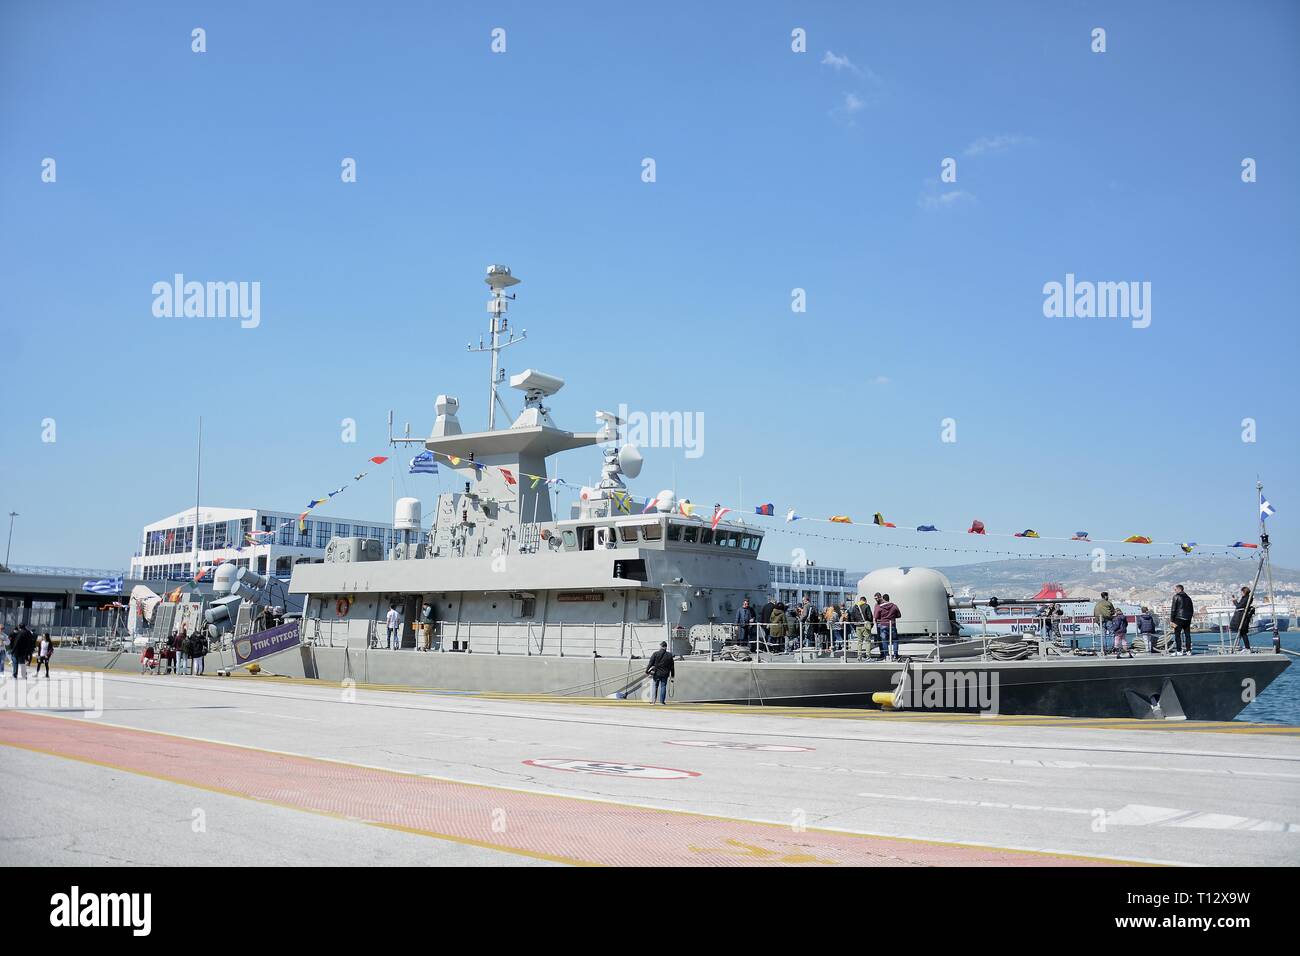 Torpedo boat of Greek Navy 'Ritsos' seen at Piraeus Port. Due to the Greek Independence Day Piraeus Port is open to the public, a national holiday celebrated annually in Greece on March 25, commemorating the start of the War of Greek’s Independence in 1821. Stock Photo